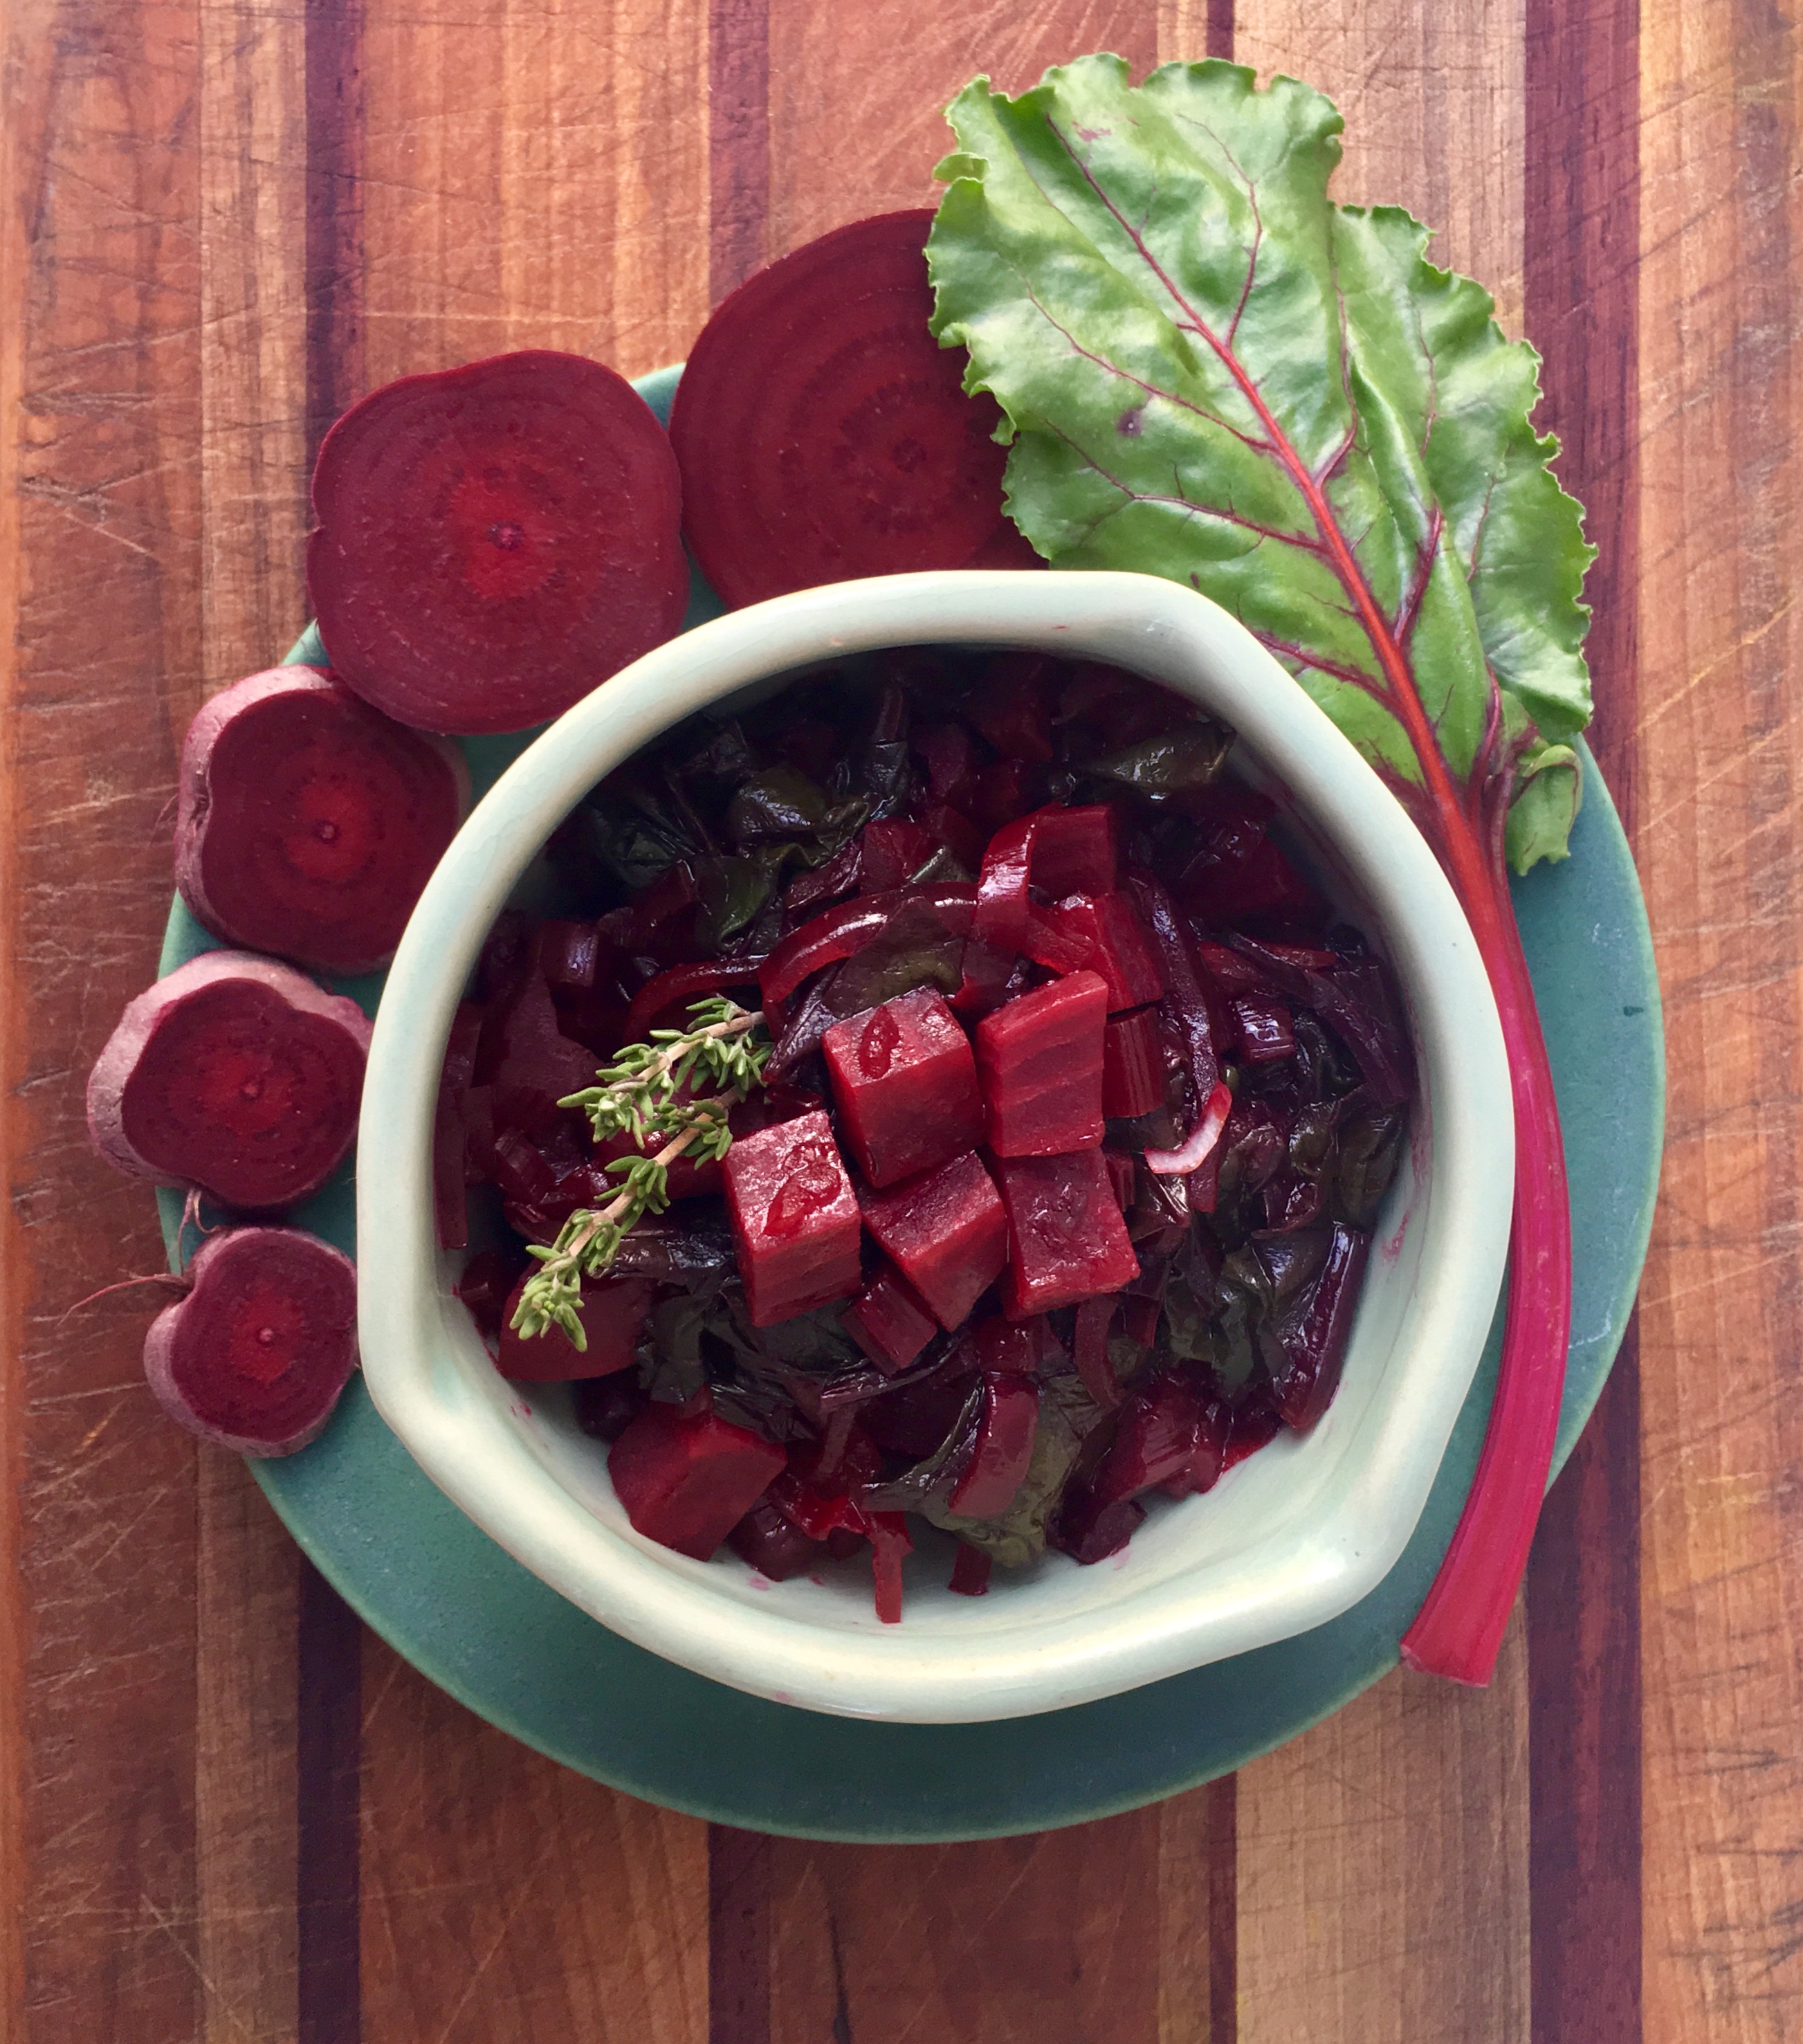 Glazed Beets and Greens - Just Say Yes